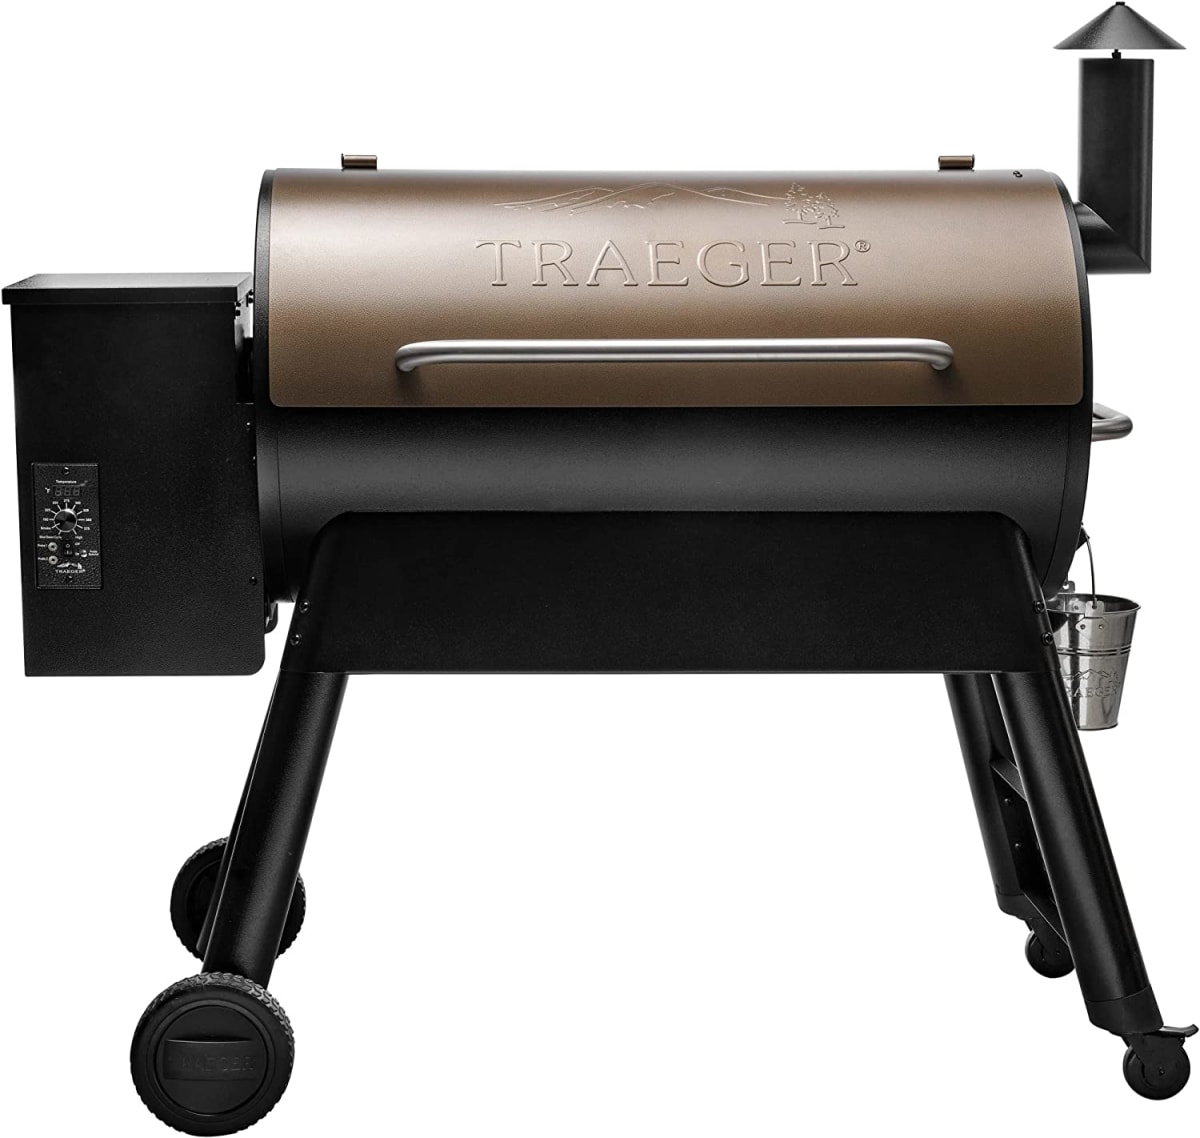 Grills Pro Series 34 Electric Wood Pellet Grill and Smoker, Bronze